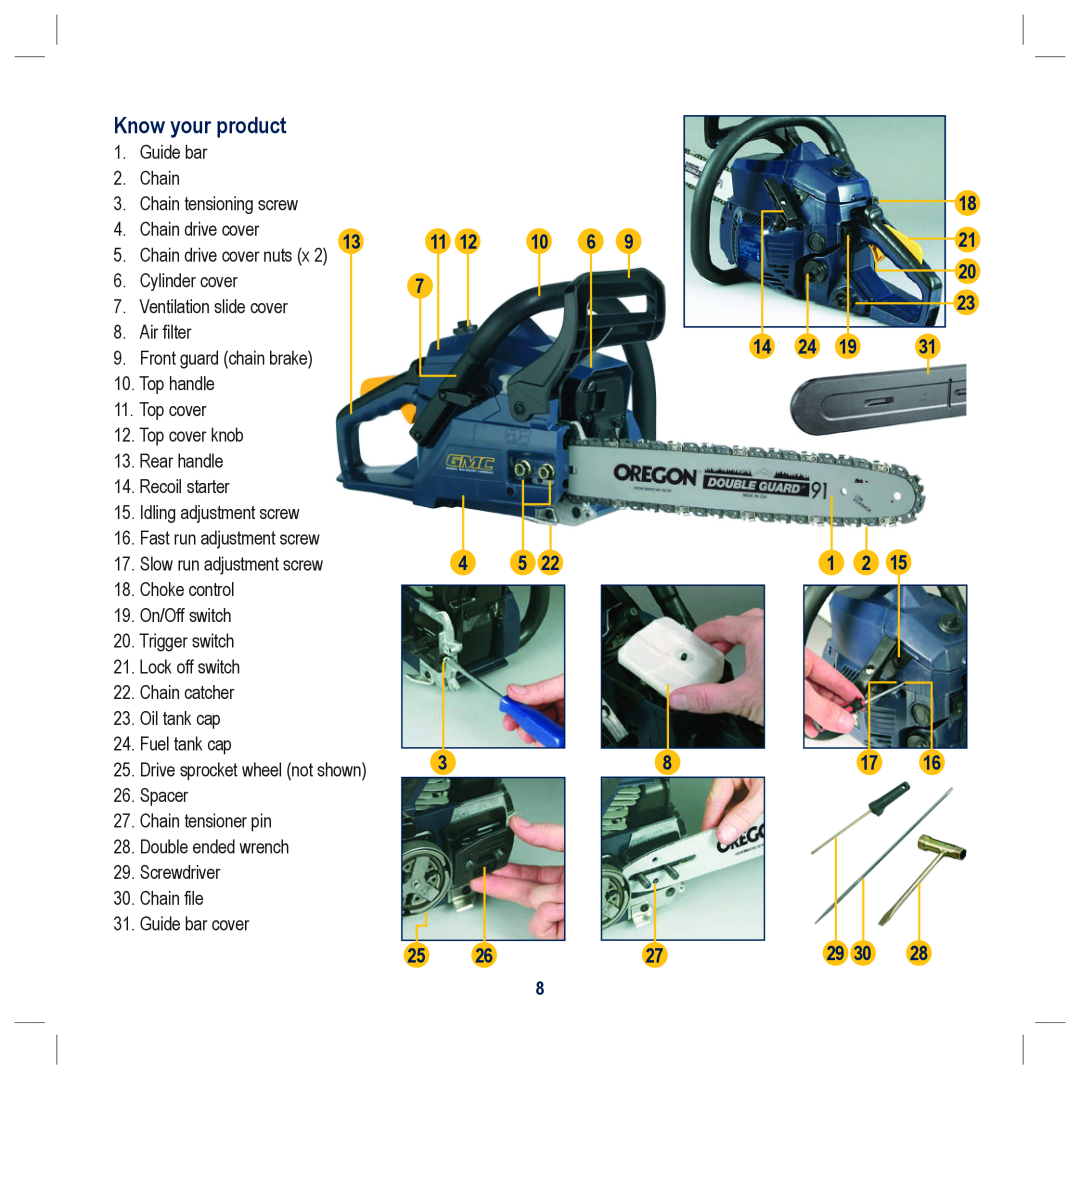 Global Machinery Company PCH37 instruction manual Know your product, Front guard chain brake, Idling adjustment screw 